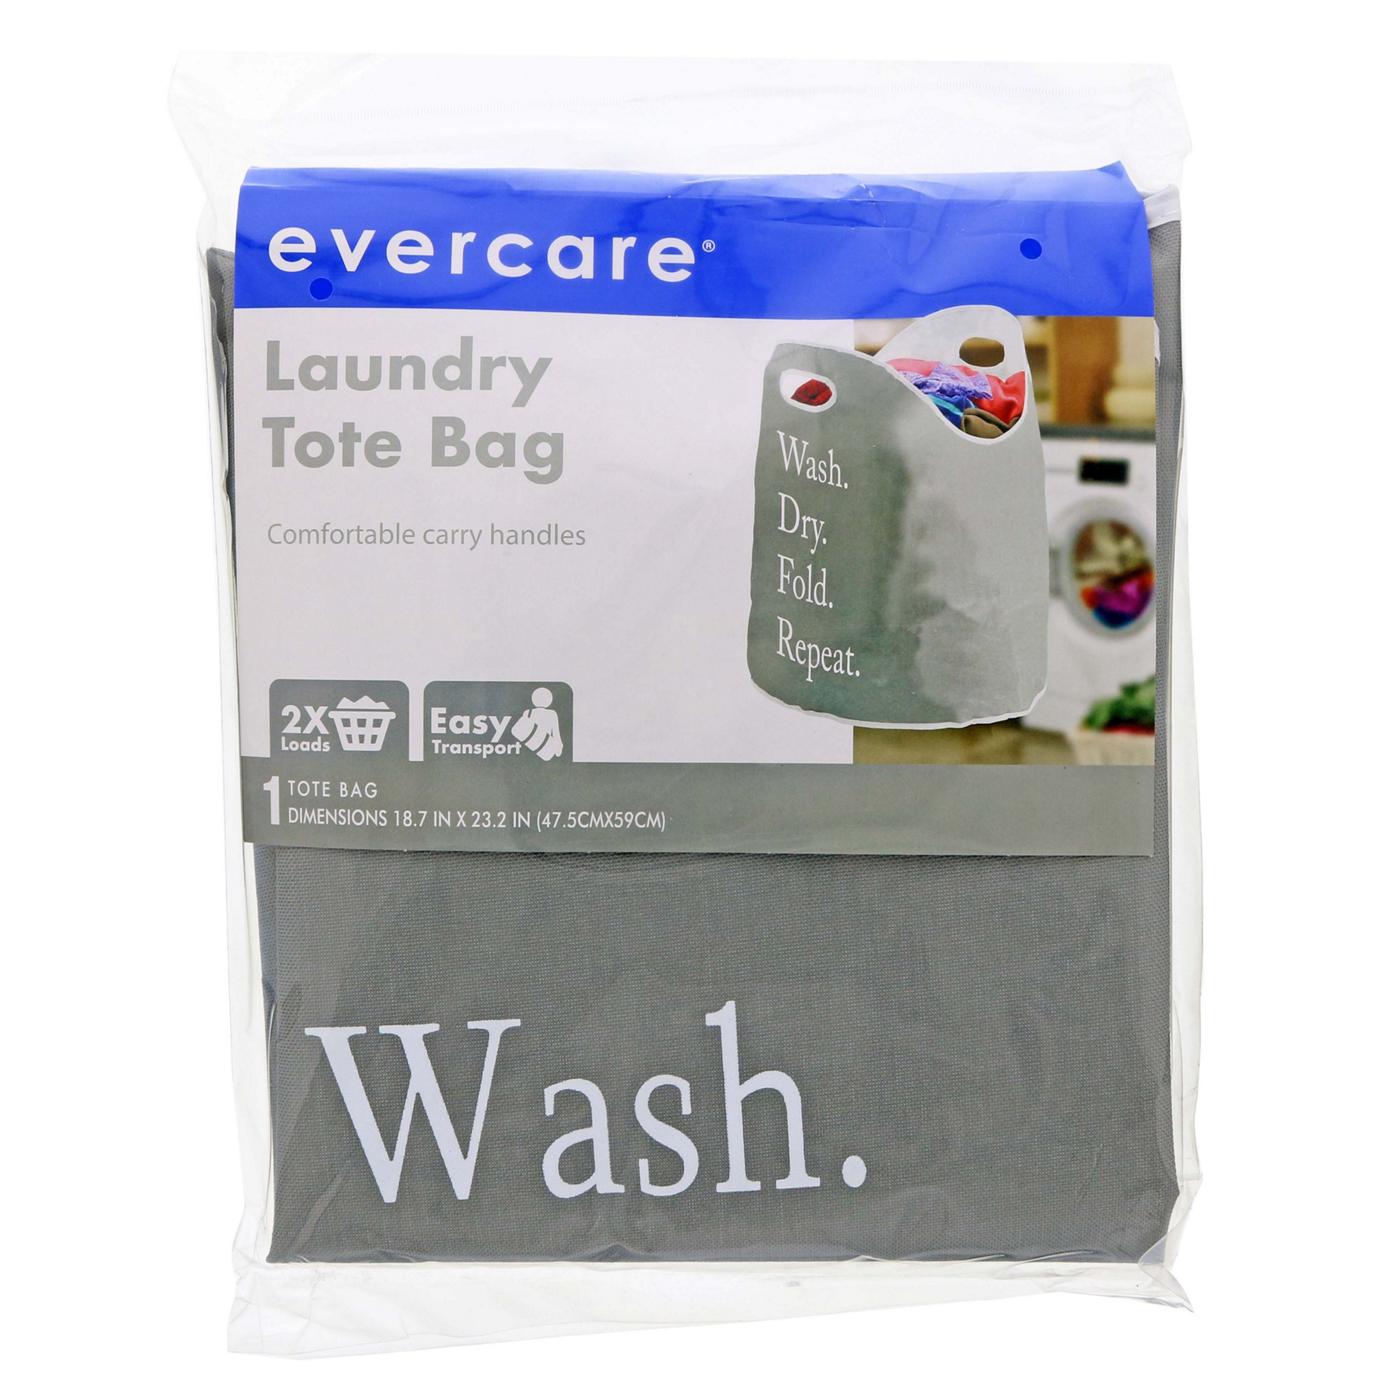 Evercare Laundry Tote Bag - Gray; image 1 of 2